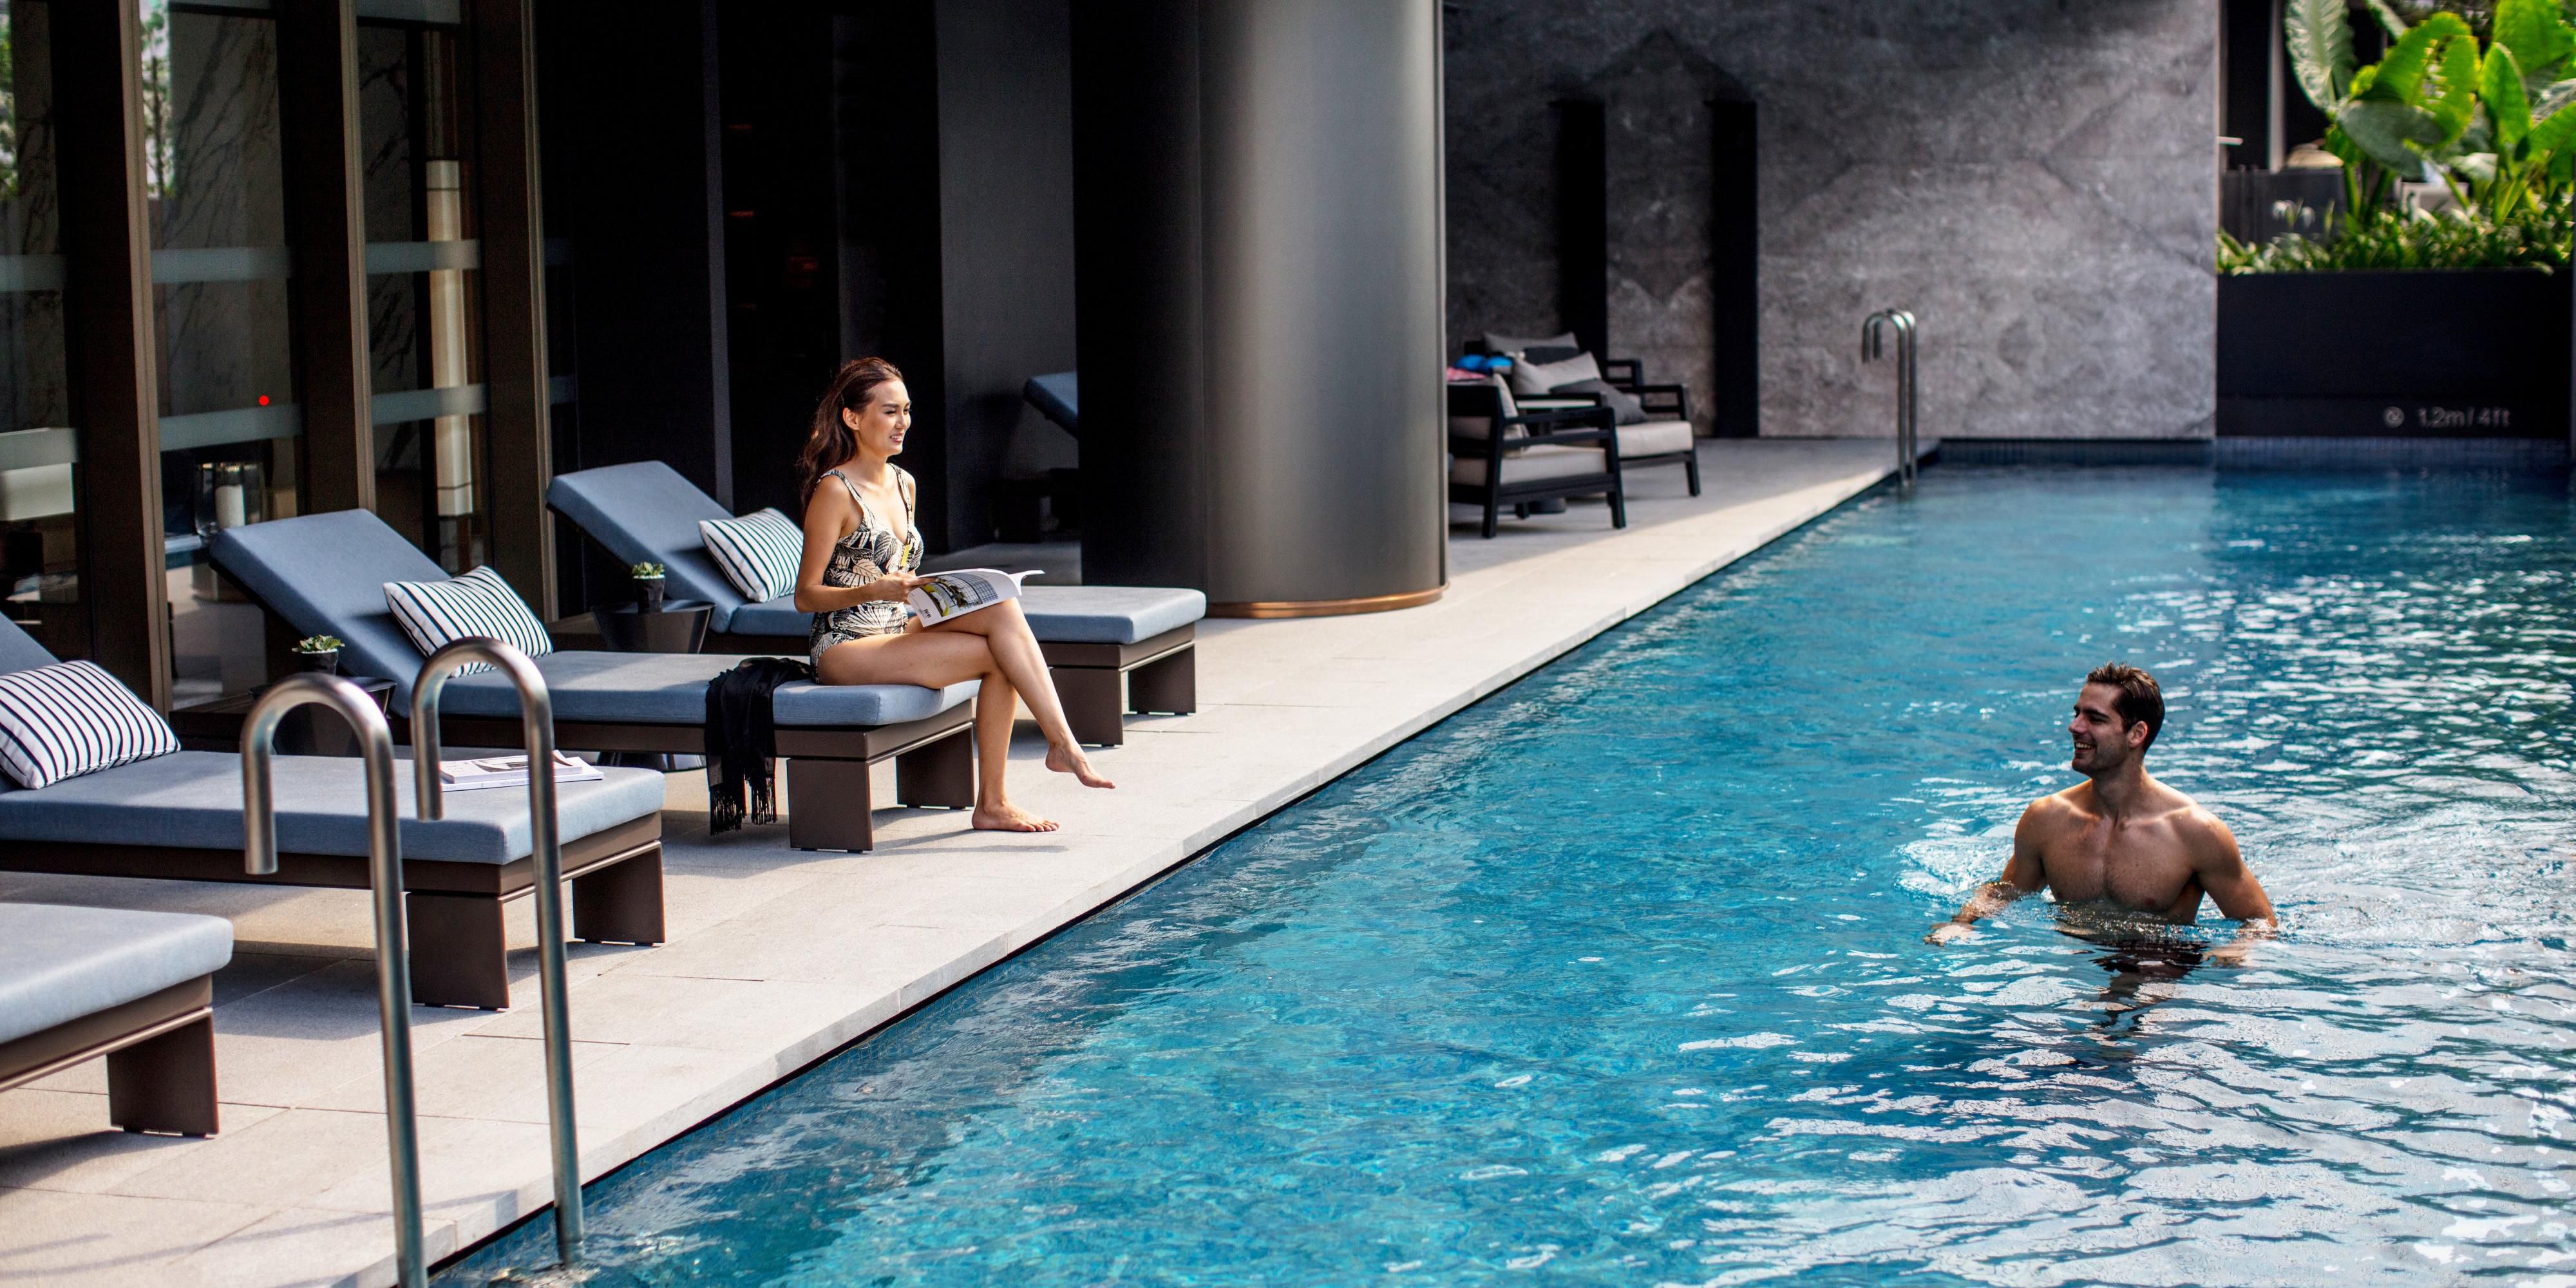 Cool off by the pool with a cocktail, or take a leisurely dip to relax and unwind at the end of the day. Whether you’re here for laps or a laze on a lounger, our pool is a great place to take a break from the frenetic pace of the city.